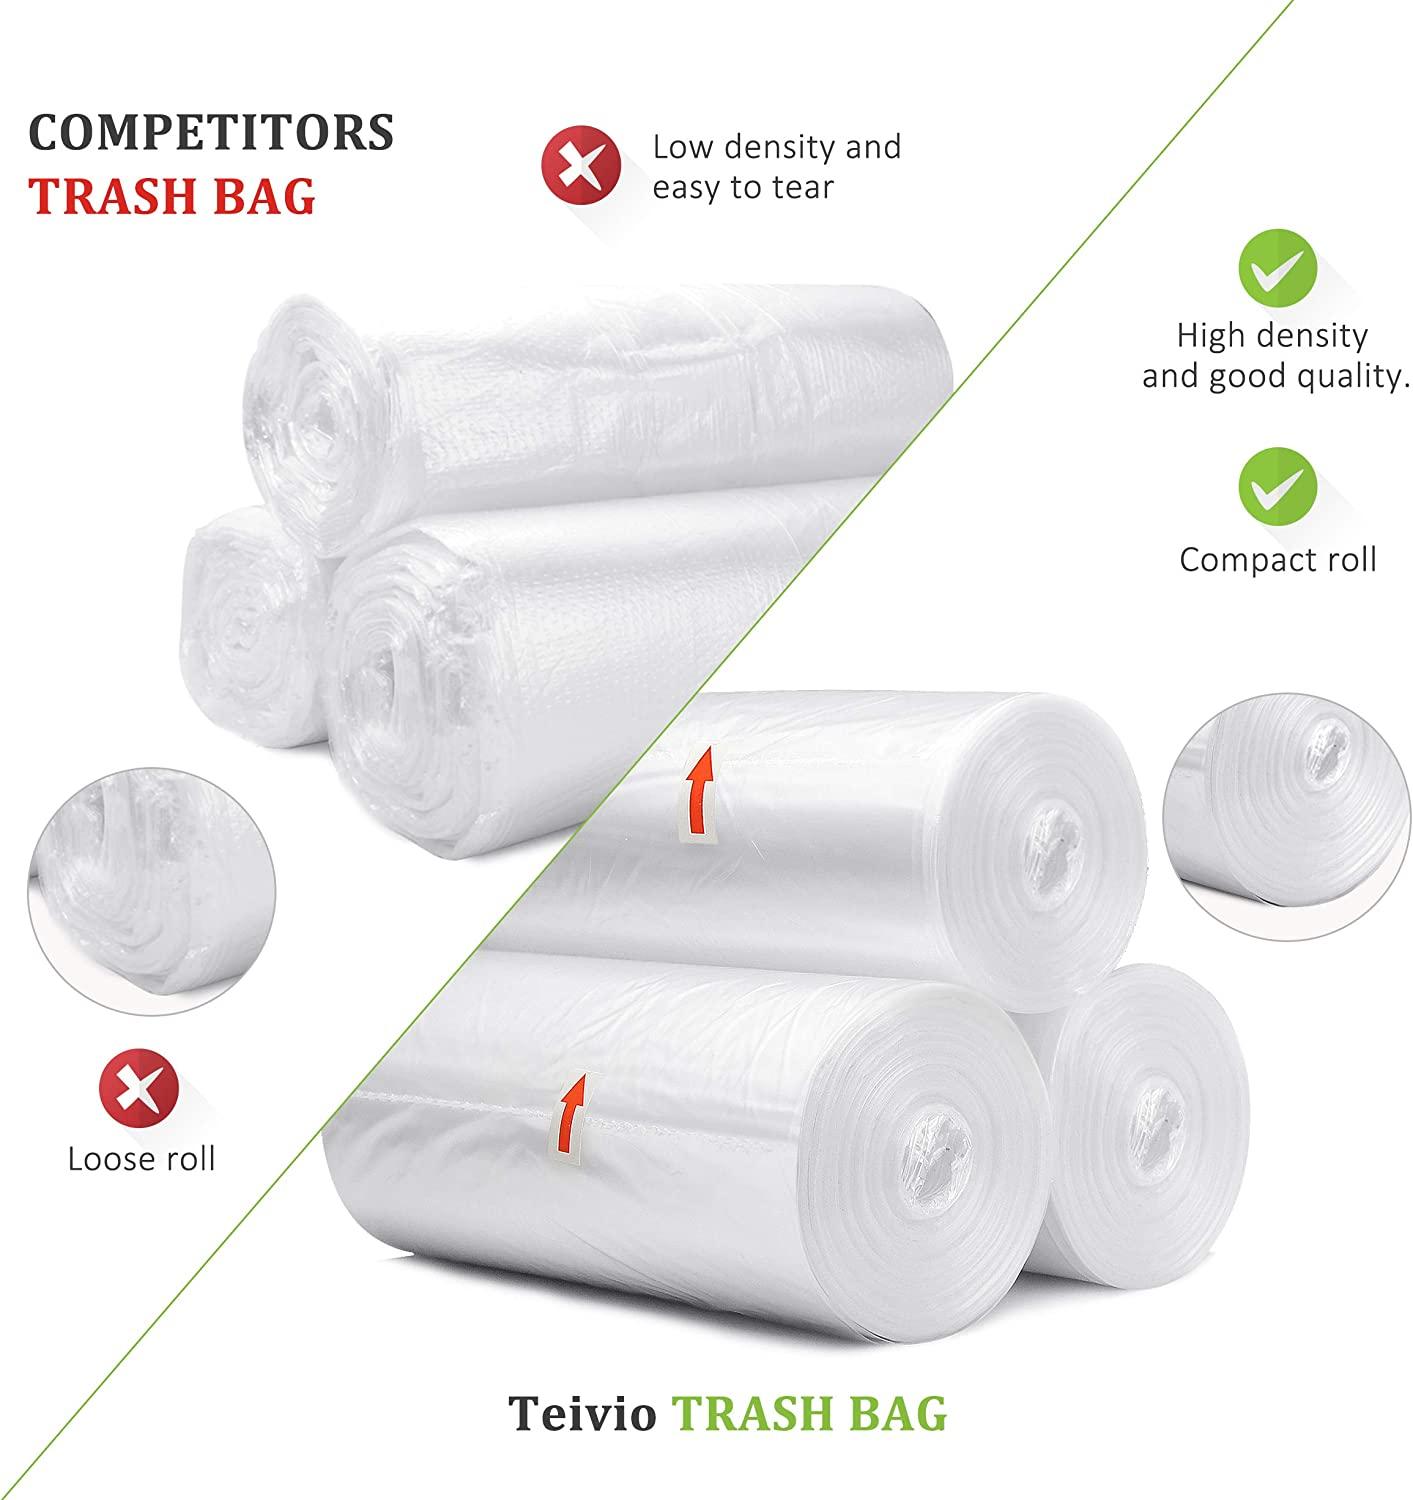 100 Counts Strong Trash Bags Garbage Bags, Bathroom Trash Can Bin Liners, Small Plastic Bags for Home Office Kitchen, Men's